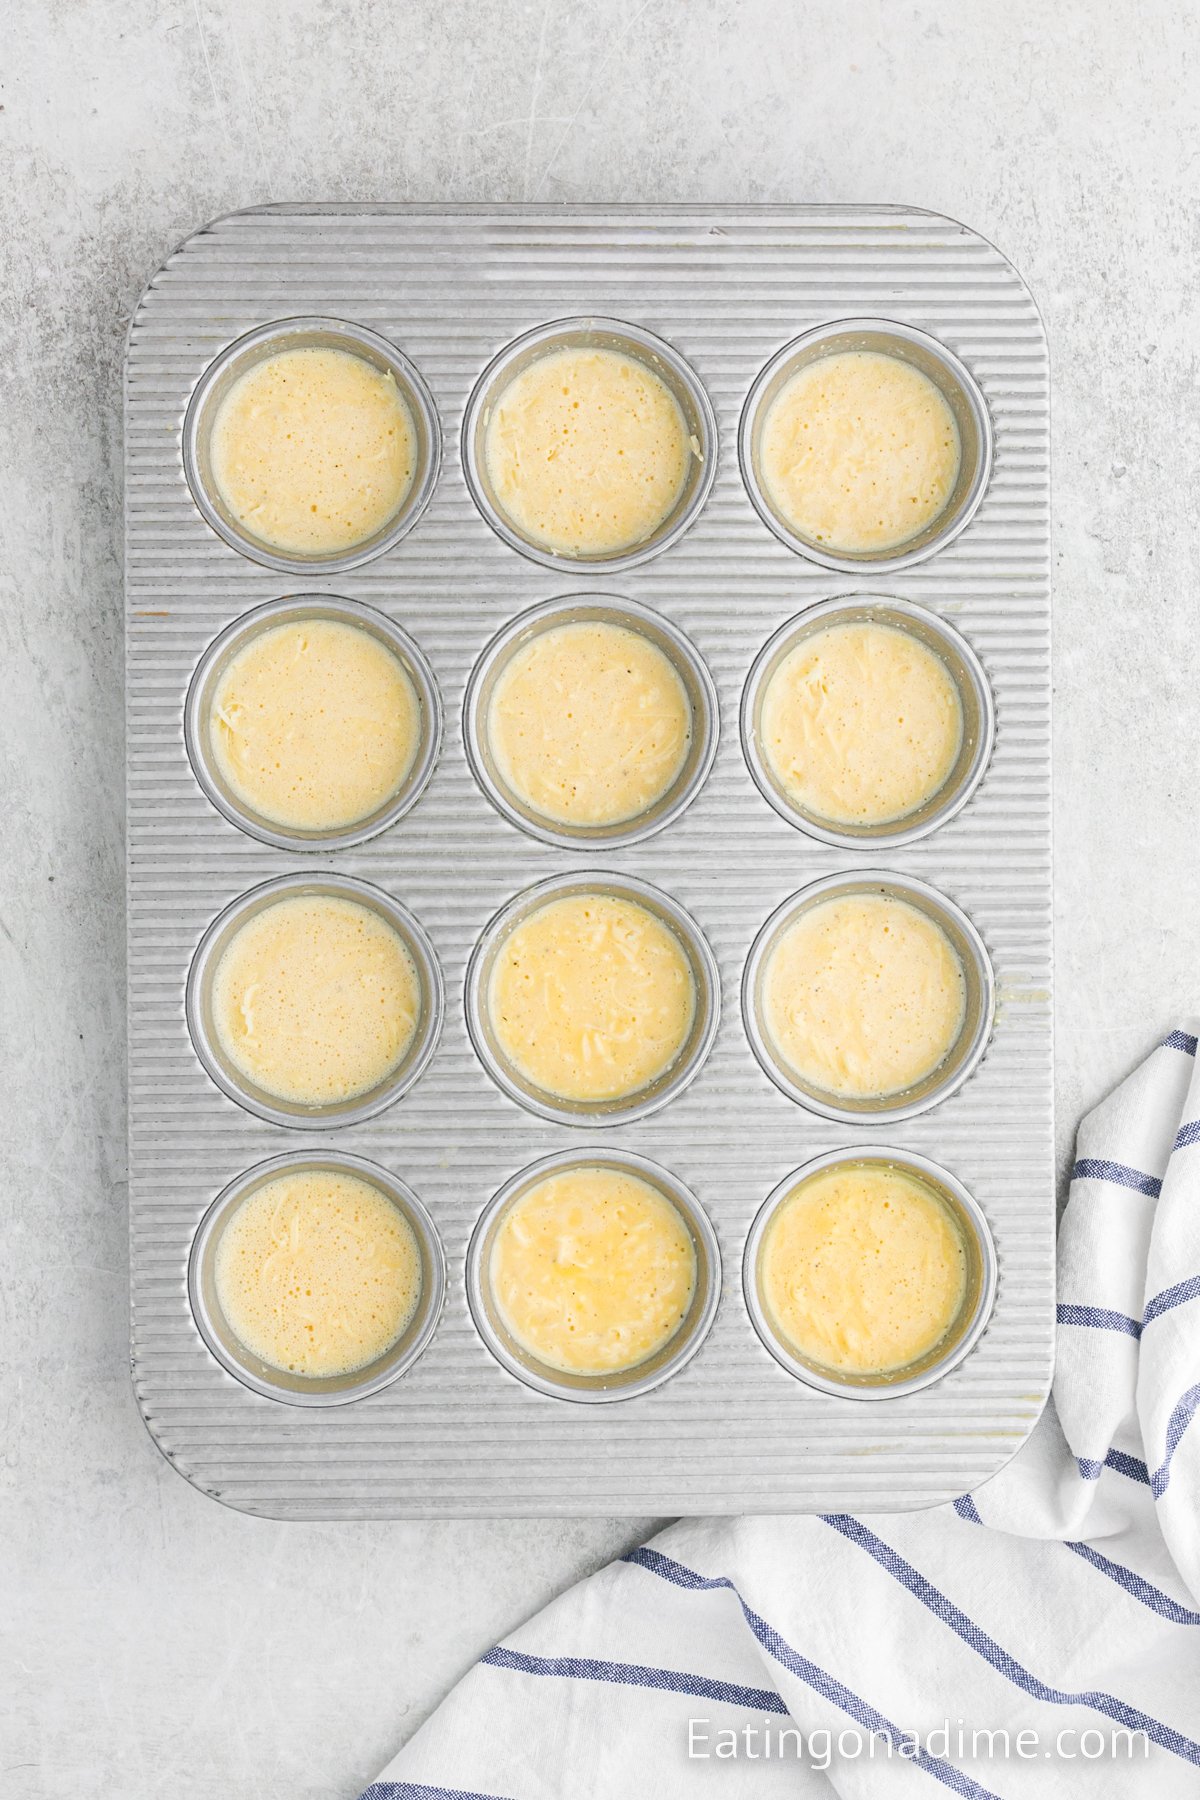 Pour mixture into muffin cups 